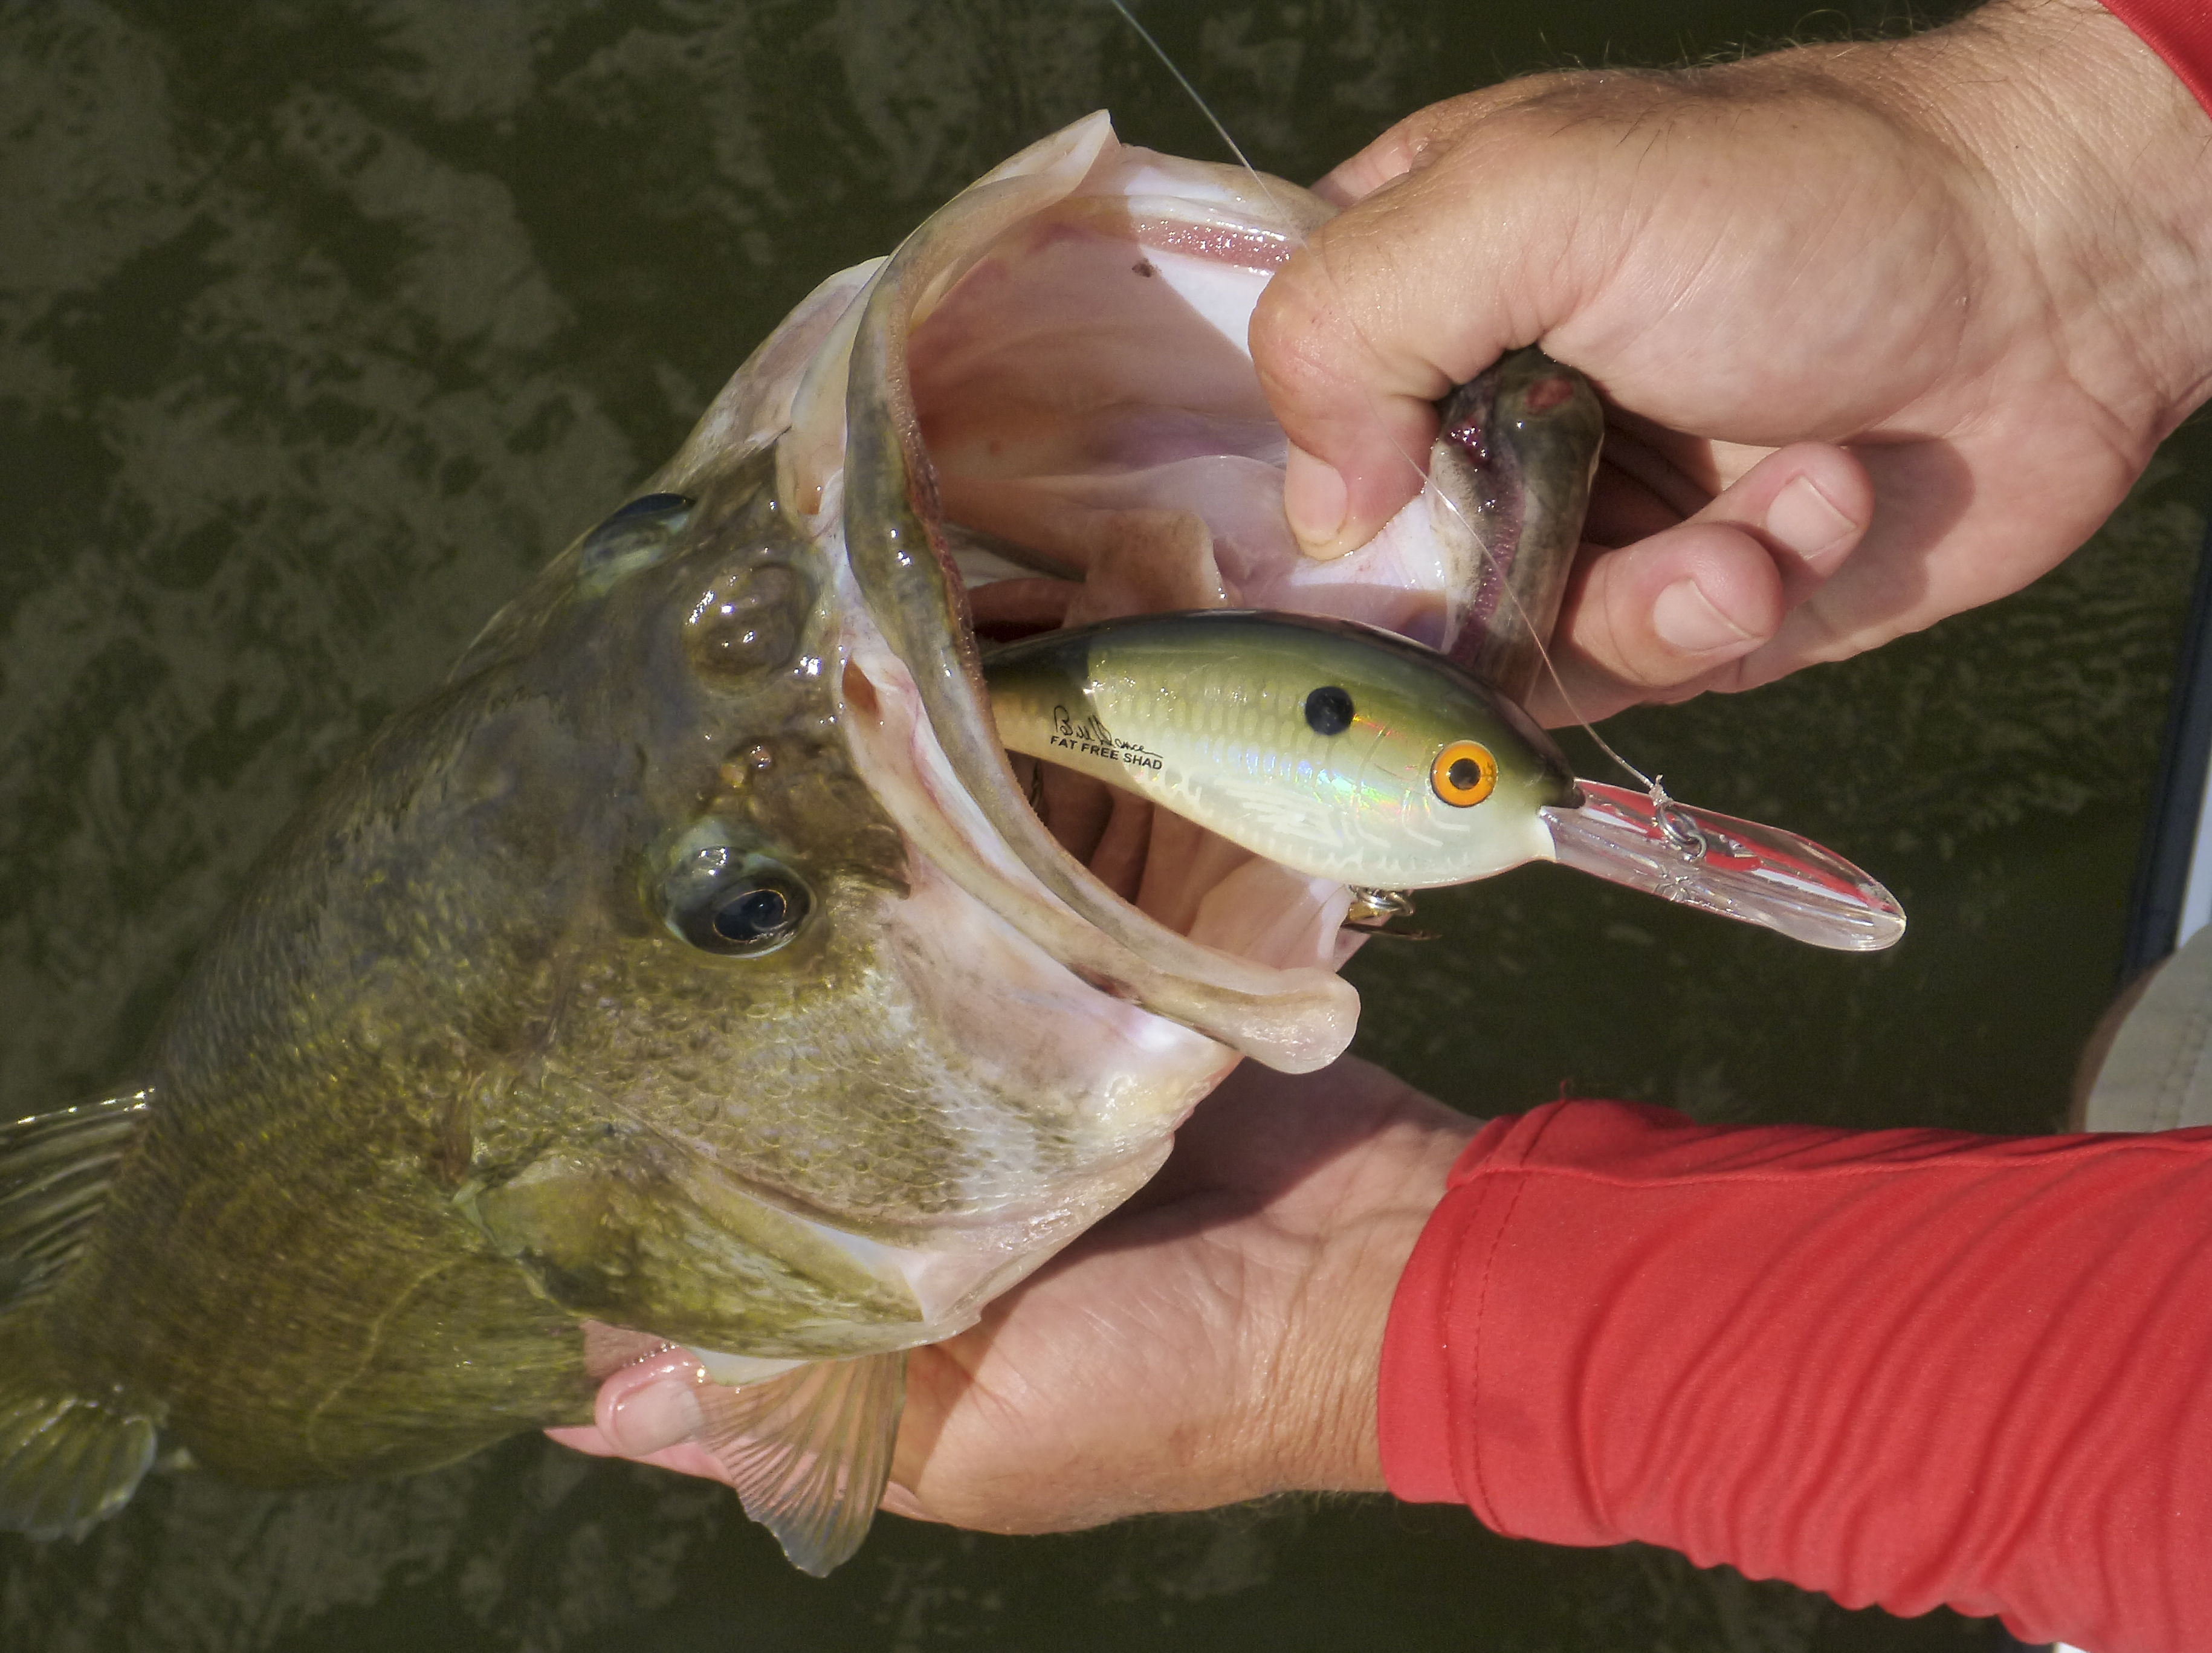 Watch Testing Different CrankBait Lip Shapes Video on